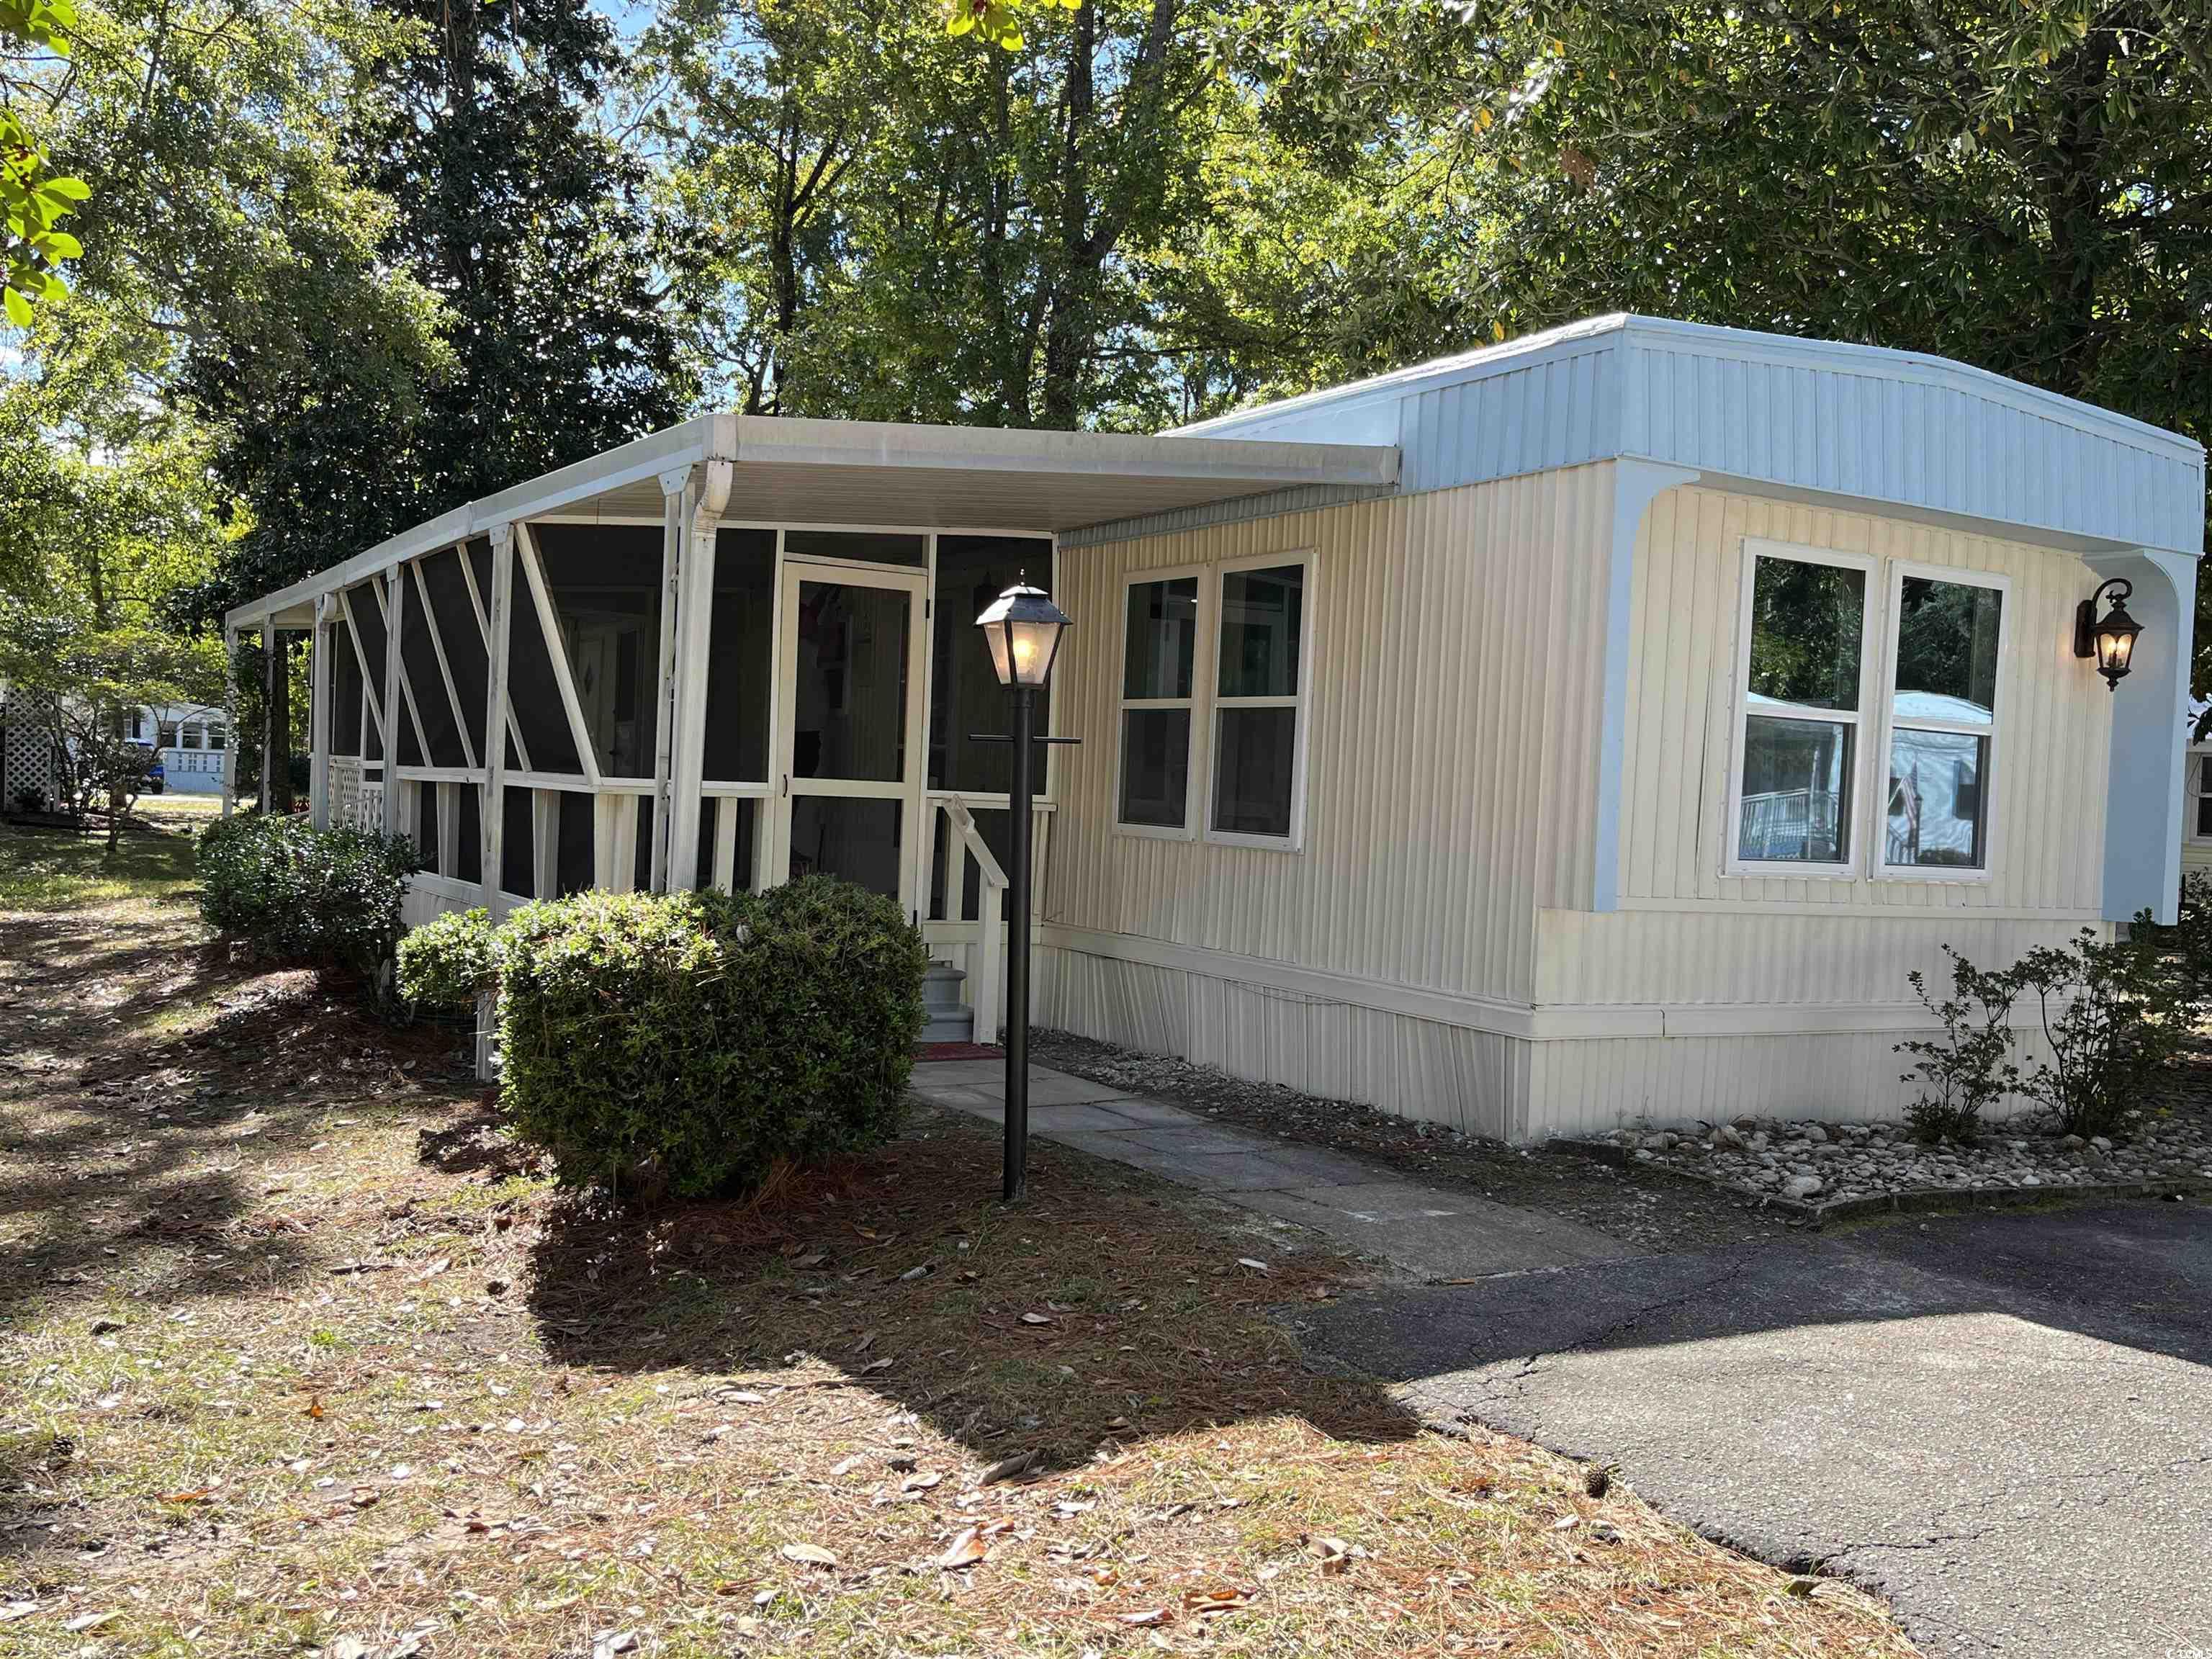 check out this charming two-bedroom, one-bath manufactured home nestled in a serene 55+ community just a short golf cart ride to the beach. this cozy beach cottage boasts a second bedroom complete with a separate sitting area, perfect for transforming into your own private sitting area. this room also has a private separate entrance for your guests to come and go privately. this completely renovated home offers new hvac, new hotwater heater, new stainless steel appliances, new kitchen cabinets with granite counters, new lvp flooring, new roof, new windows, fresh neutral paint, new double sink vanity, walk in shower. enjoy the best of beachside living in this affordable and comfortable home, offering both relaxation and convenience in a vibrant 55+ community. don't miss the opportunity to make this seaside oasis your own! all measurements are appproximate, it is the responsibility of the buyer to measure. owner is a licensed sc realtor.